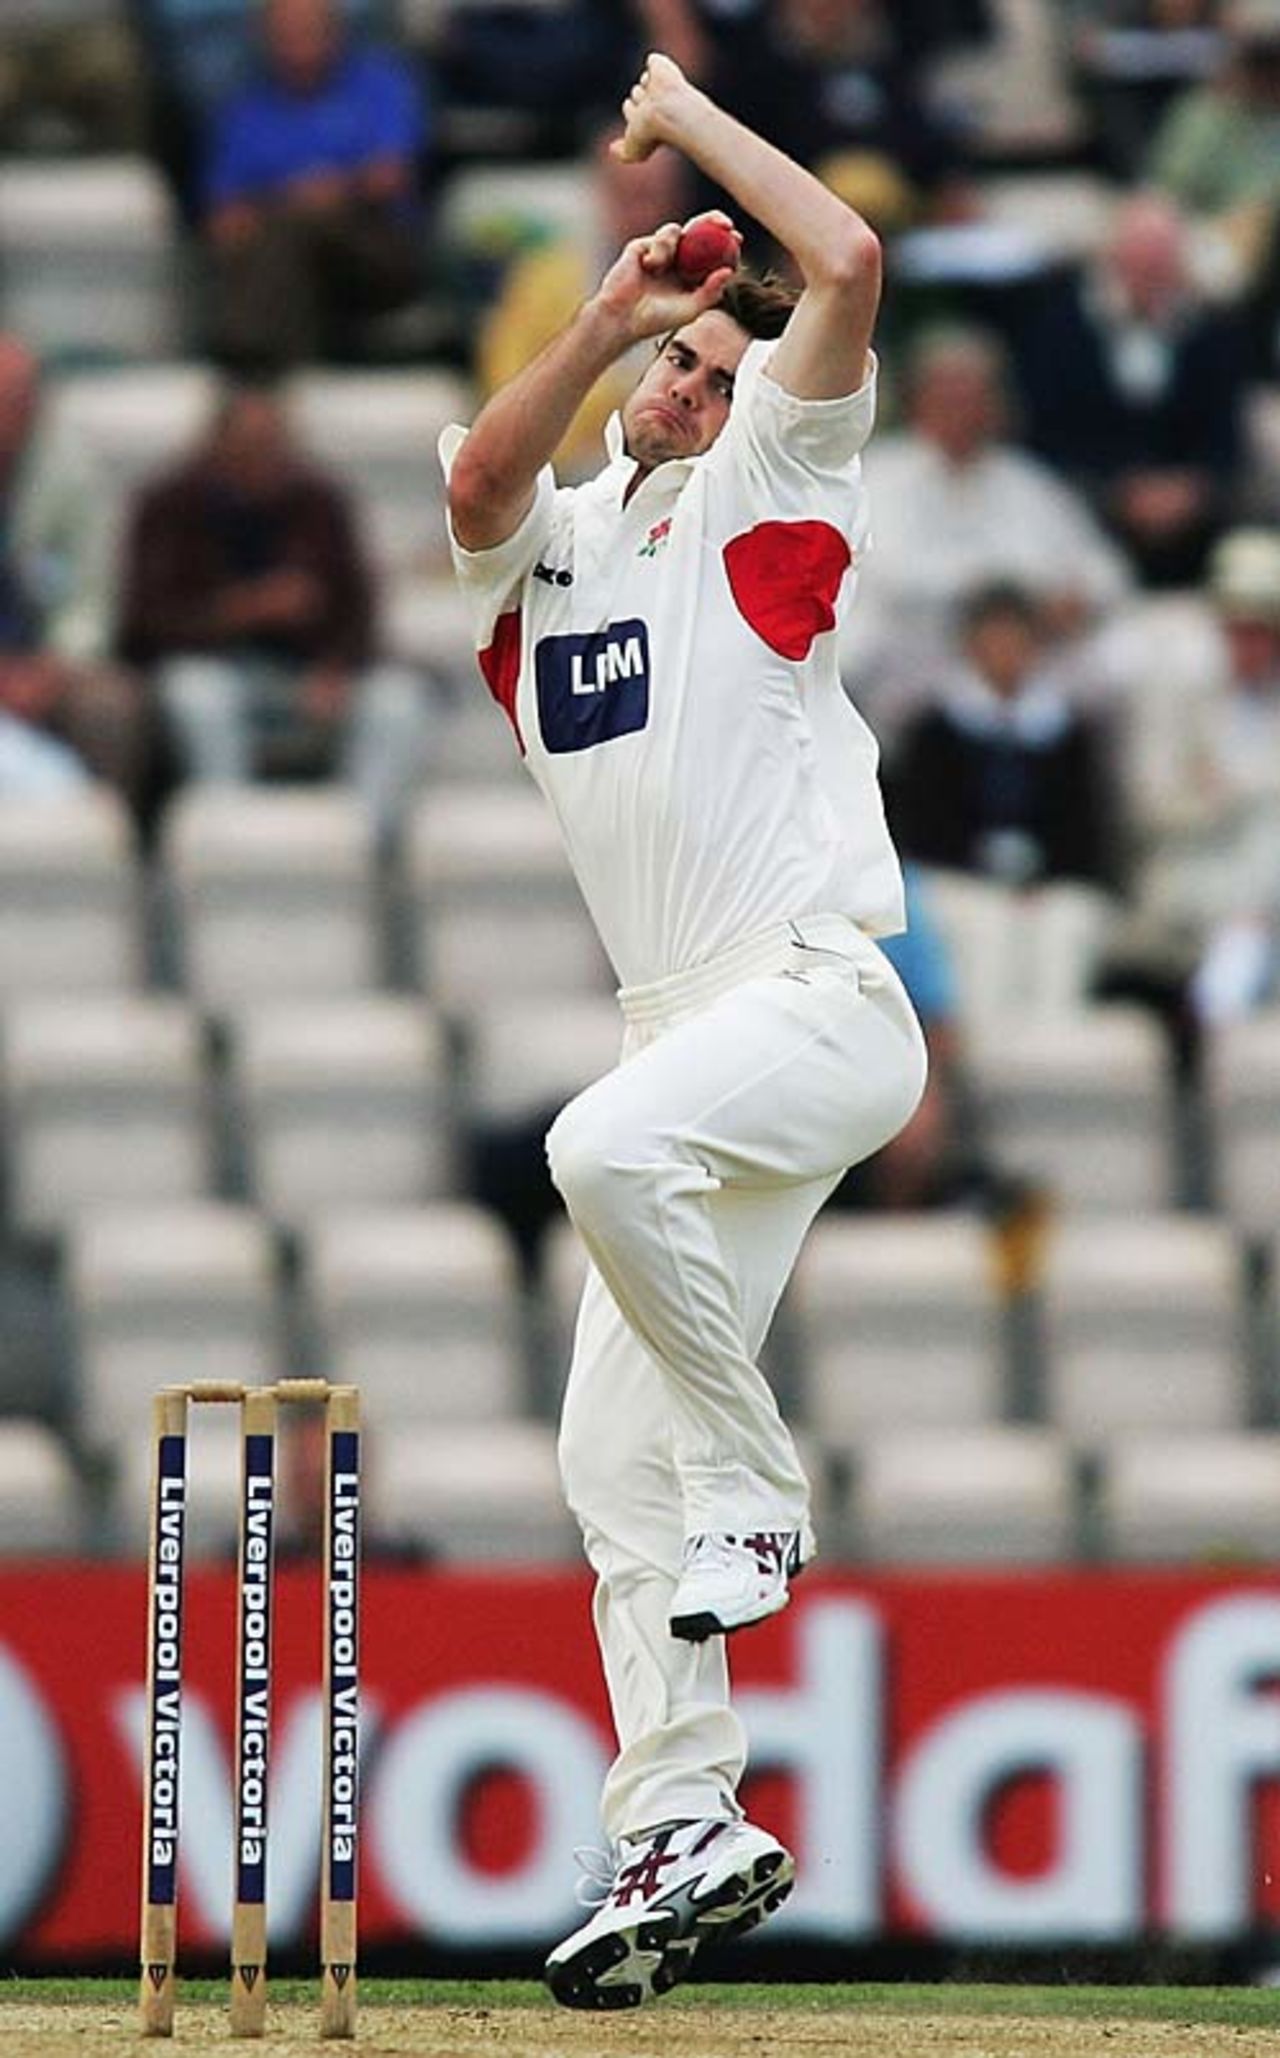 James Anderson approaches the crease in his first bowl for Lancashire all season, Hampshire v Lancashire, County Championship, The Rose Bowl, September 21, 2006 